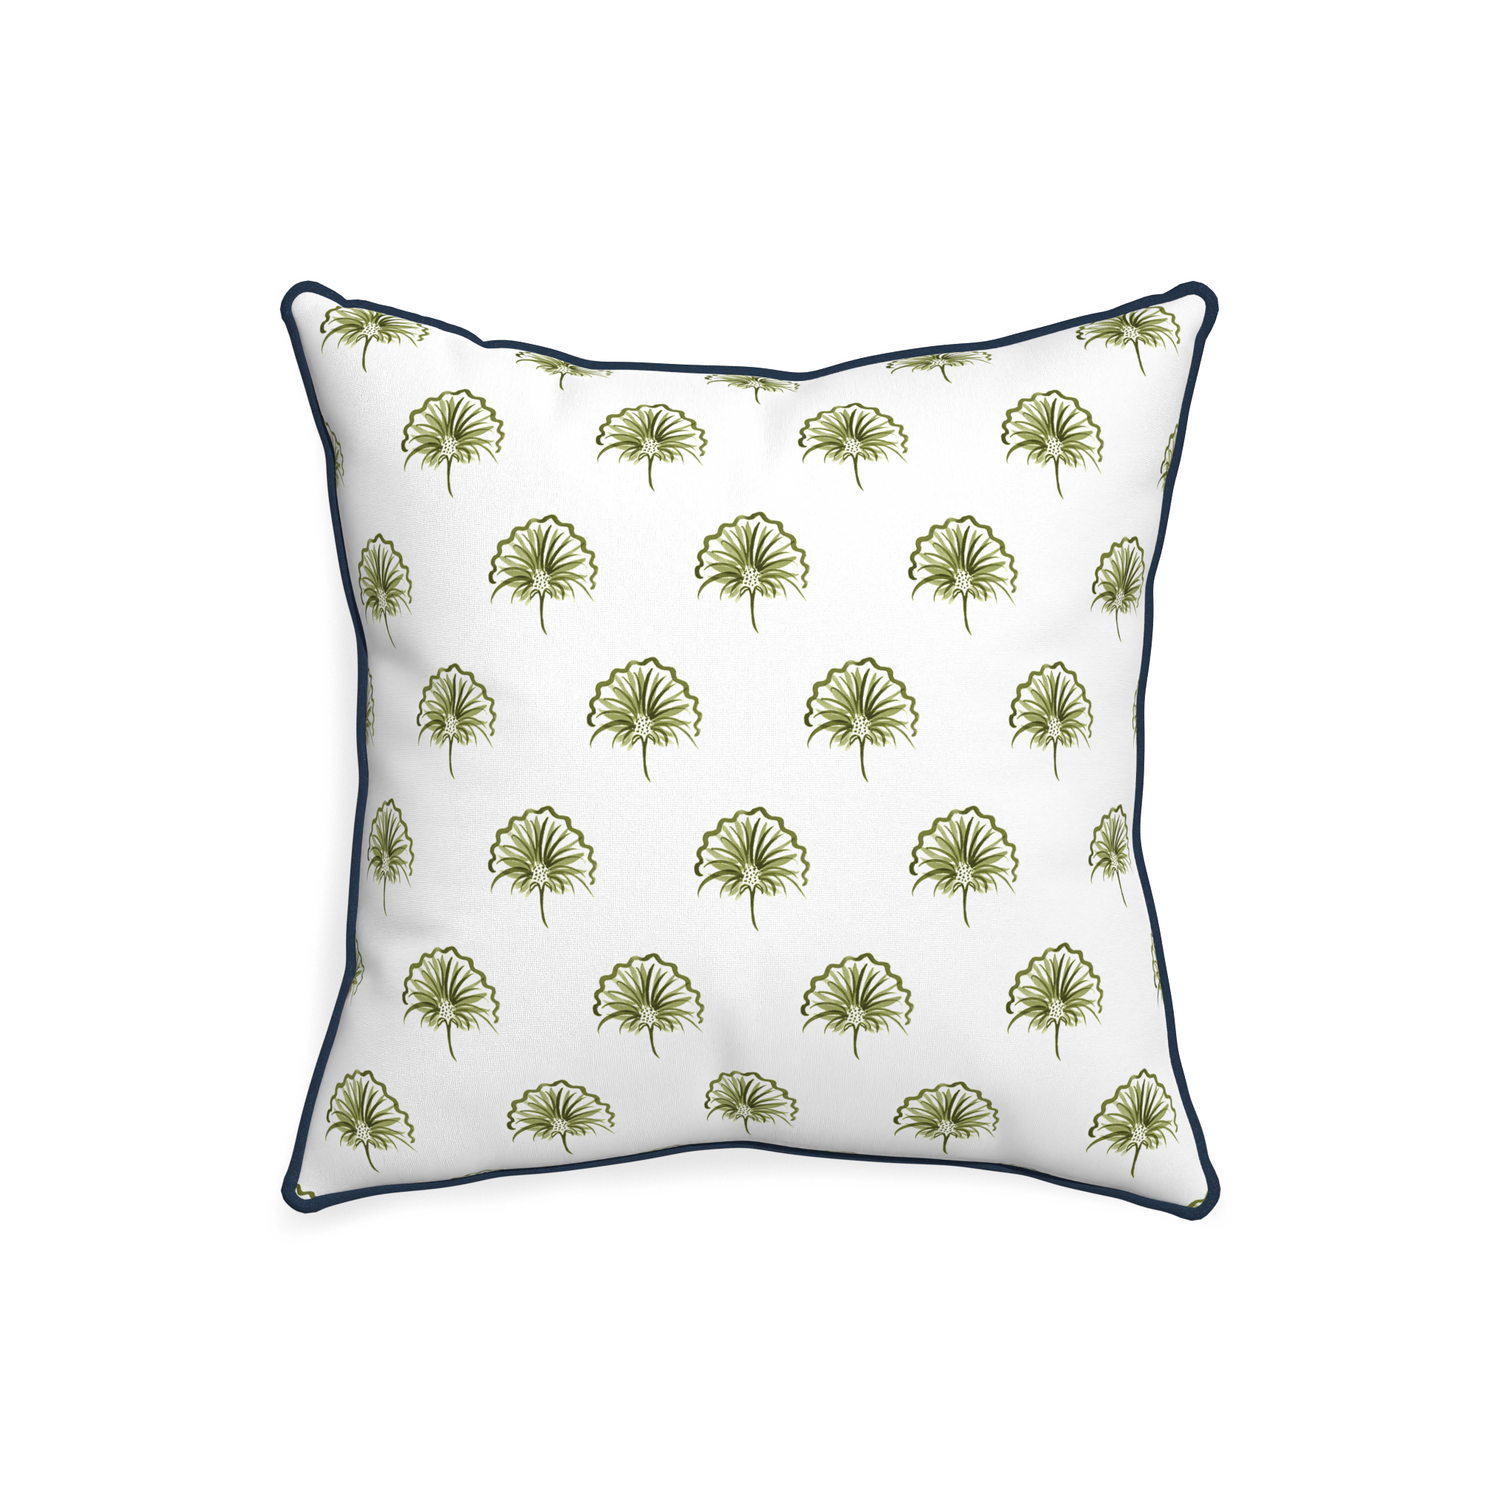 20-square penelope moss custom green floralpillow with c piping on white background